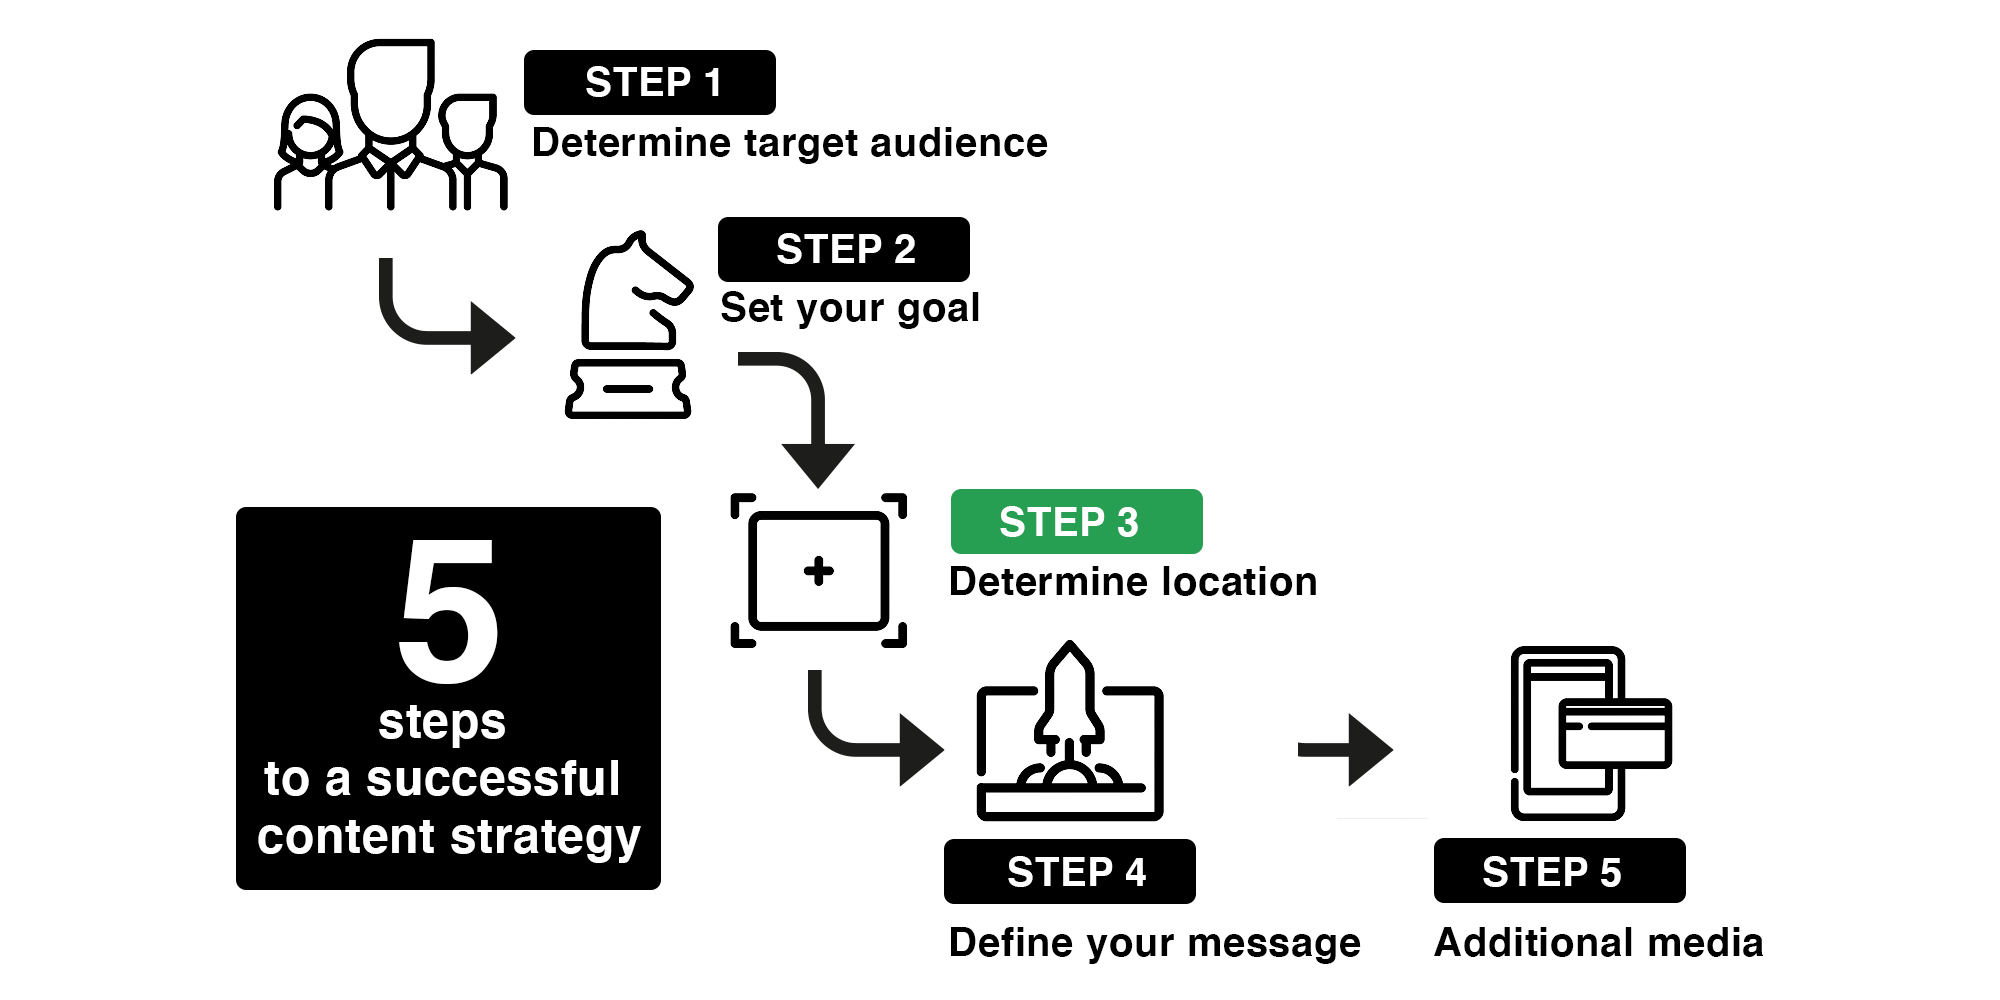 Step 3 of creating a Content Strategy in 5 steps